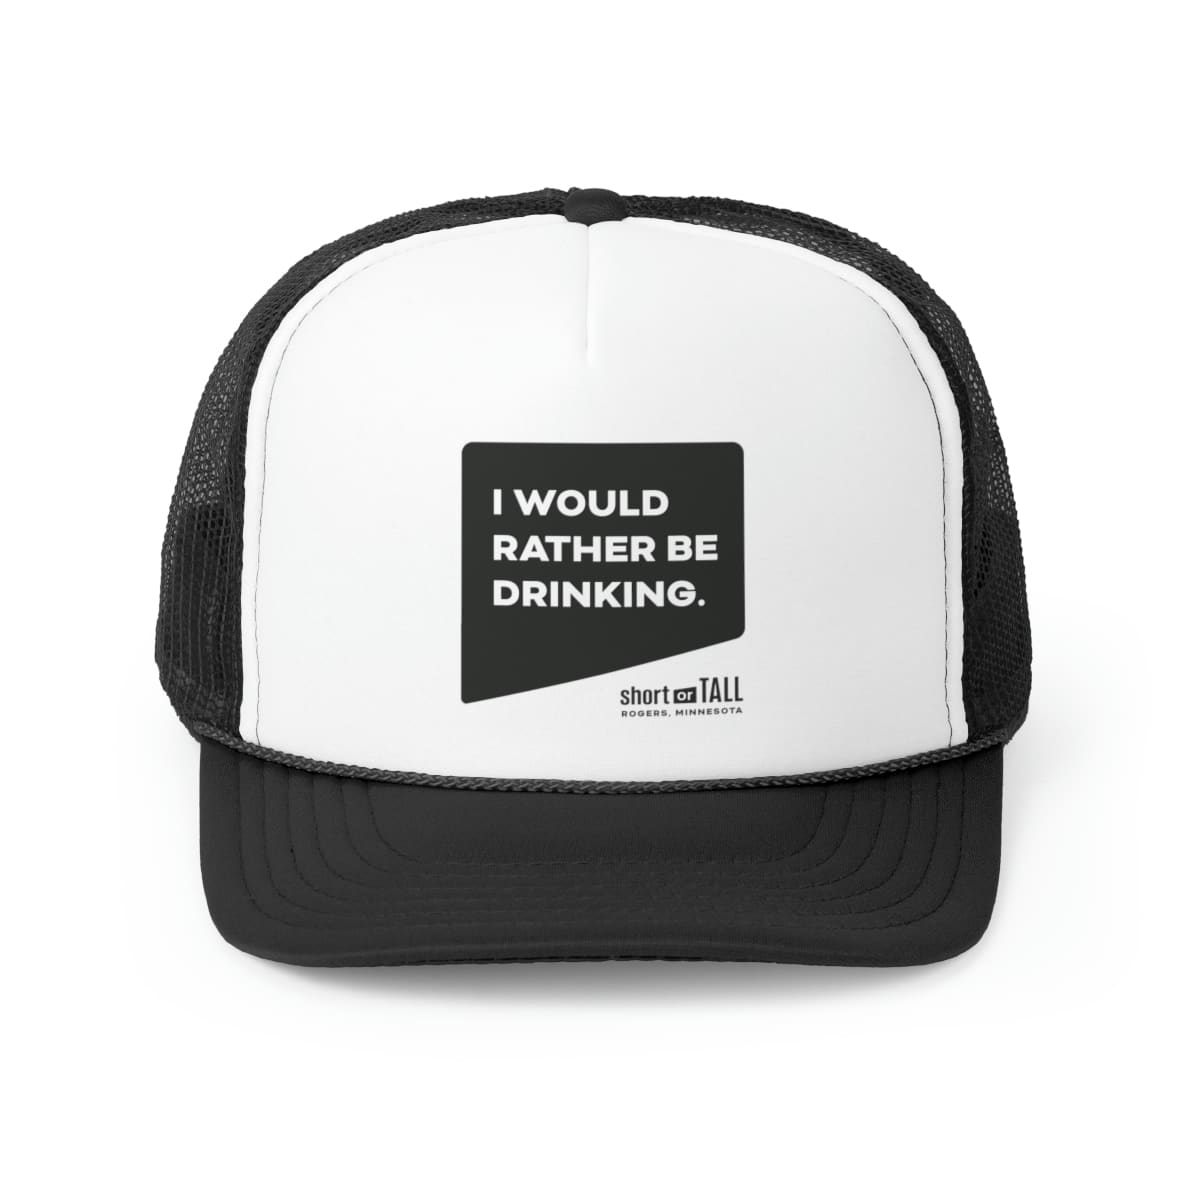 “I Would Rather Be Drinking” Trucker Cap